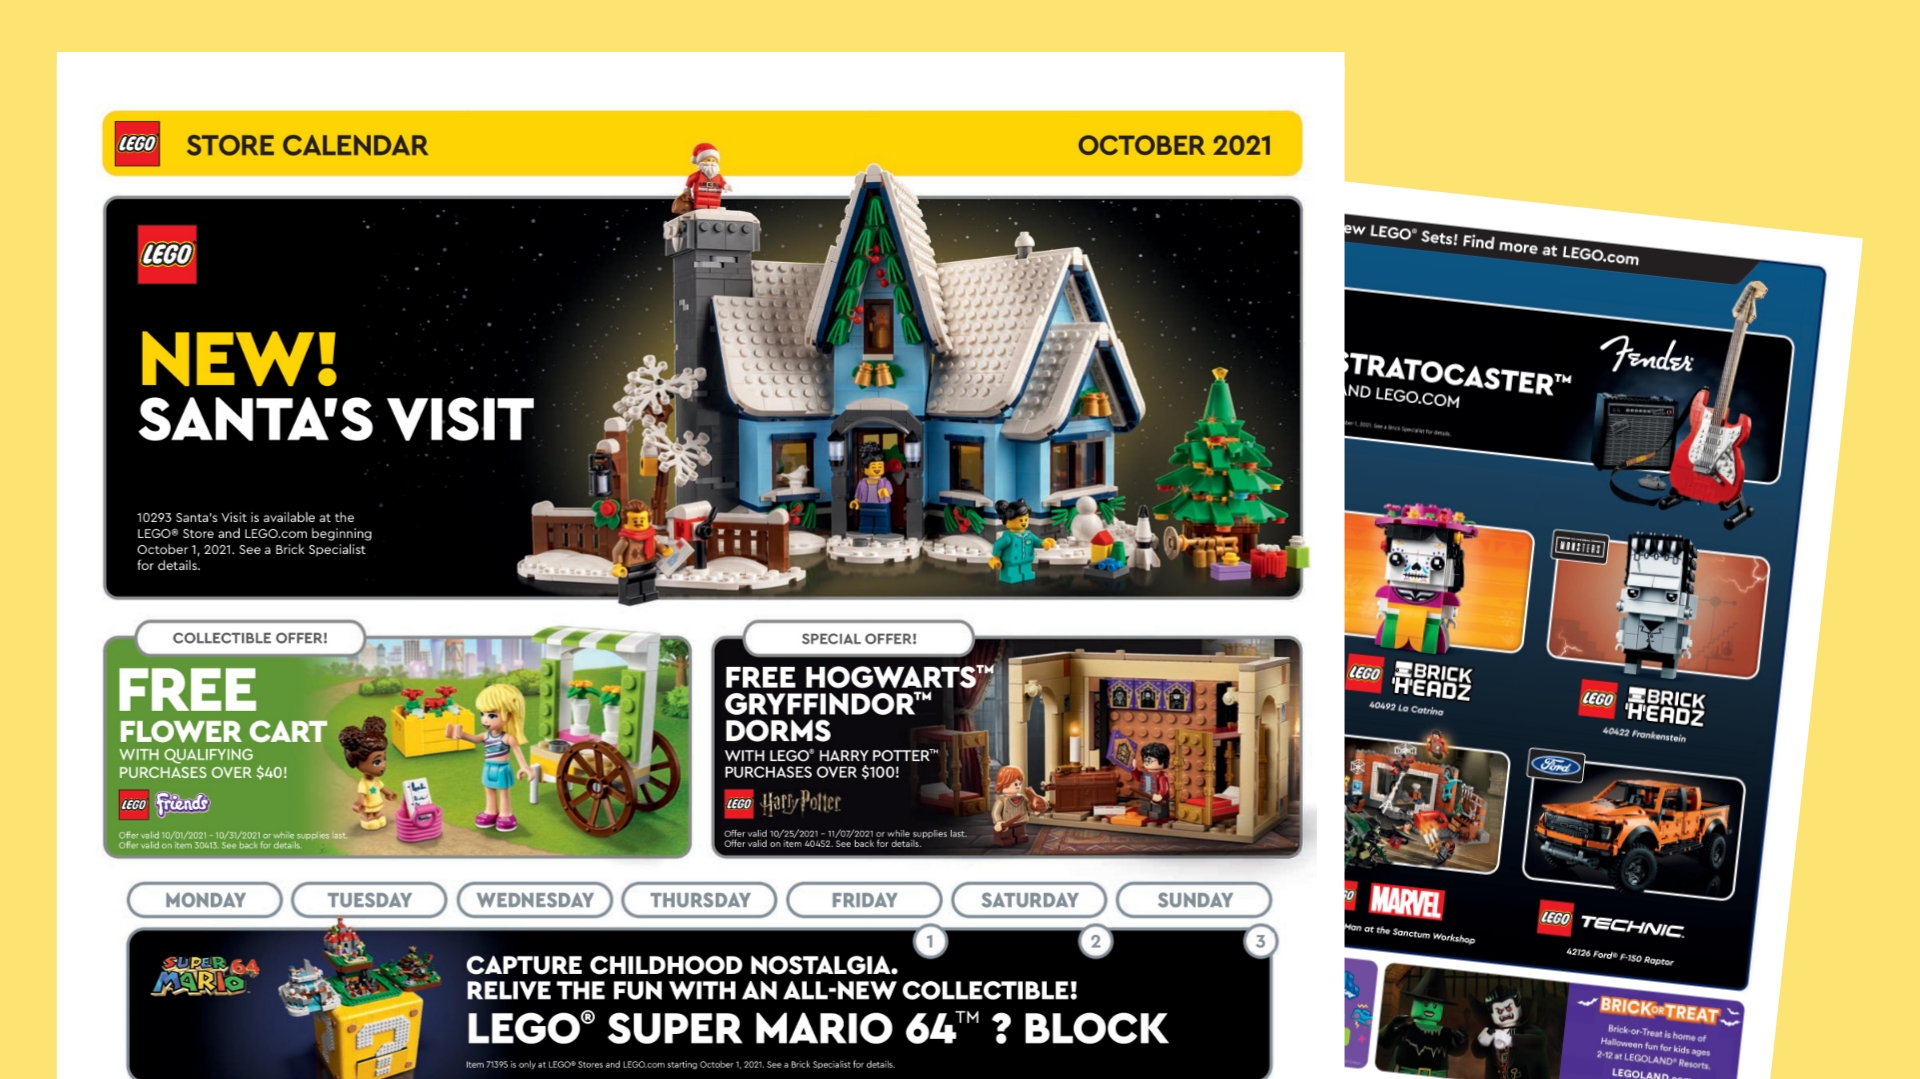 Lego Calendar October 2022 Us Lego Store Calendar For October 2021 Is Here! | The Brick Post!